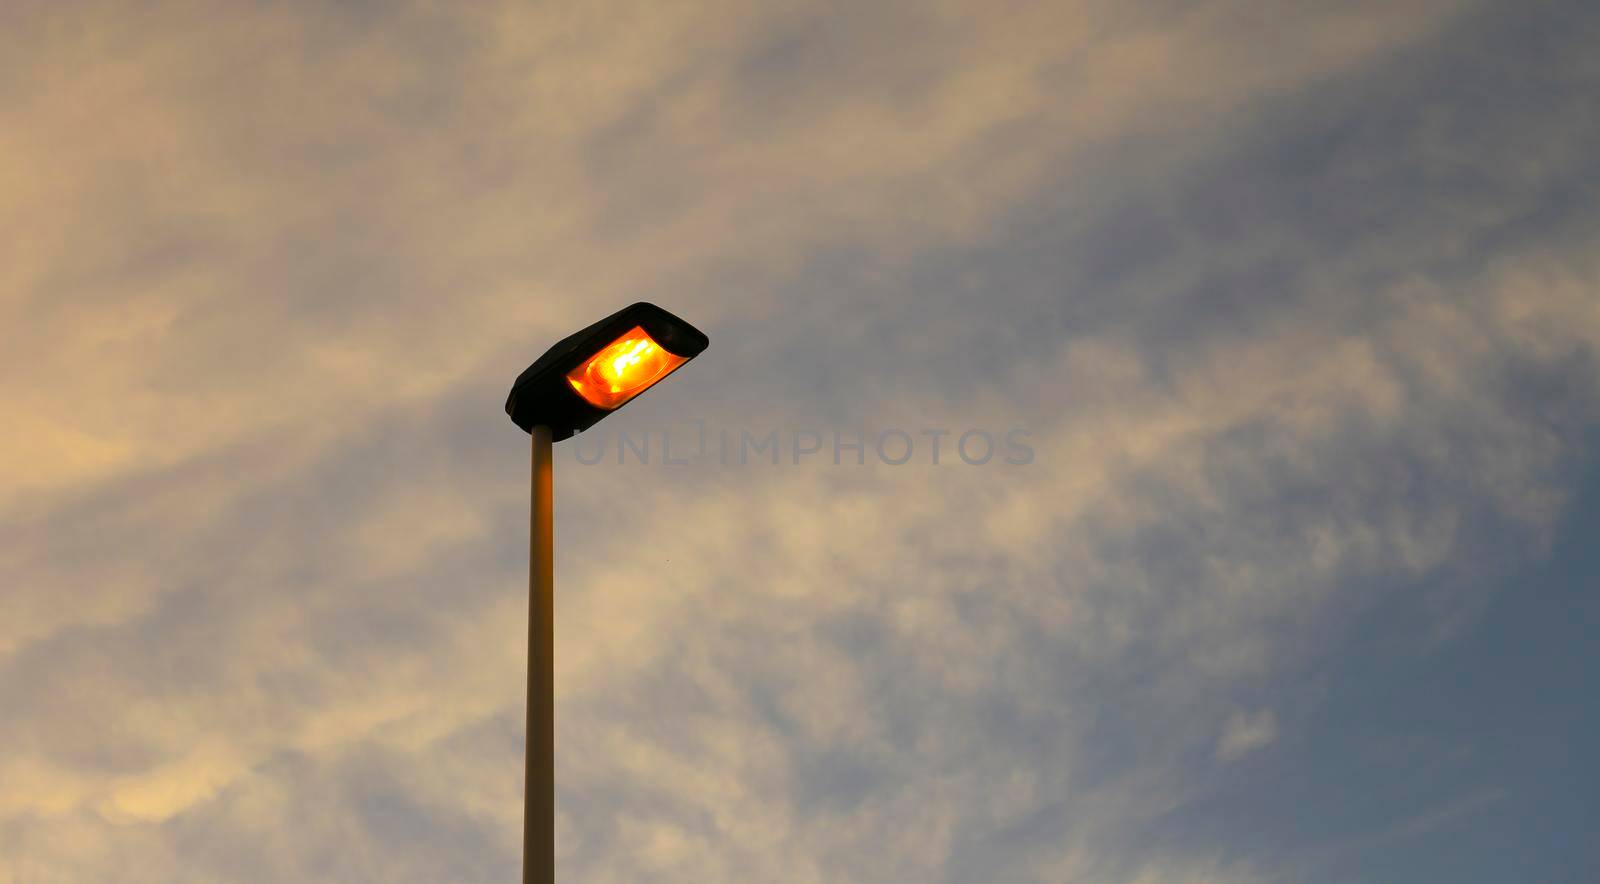 High lamppost in the afternoon at sunset by soniabonet